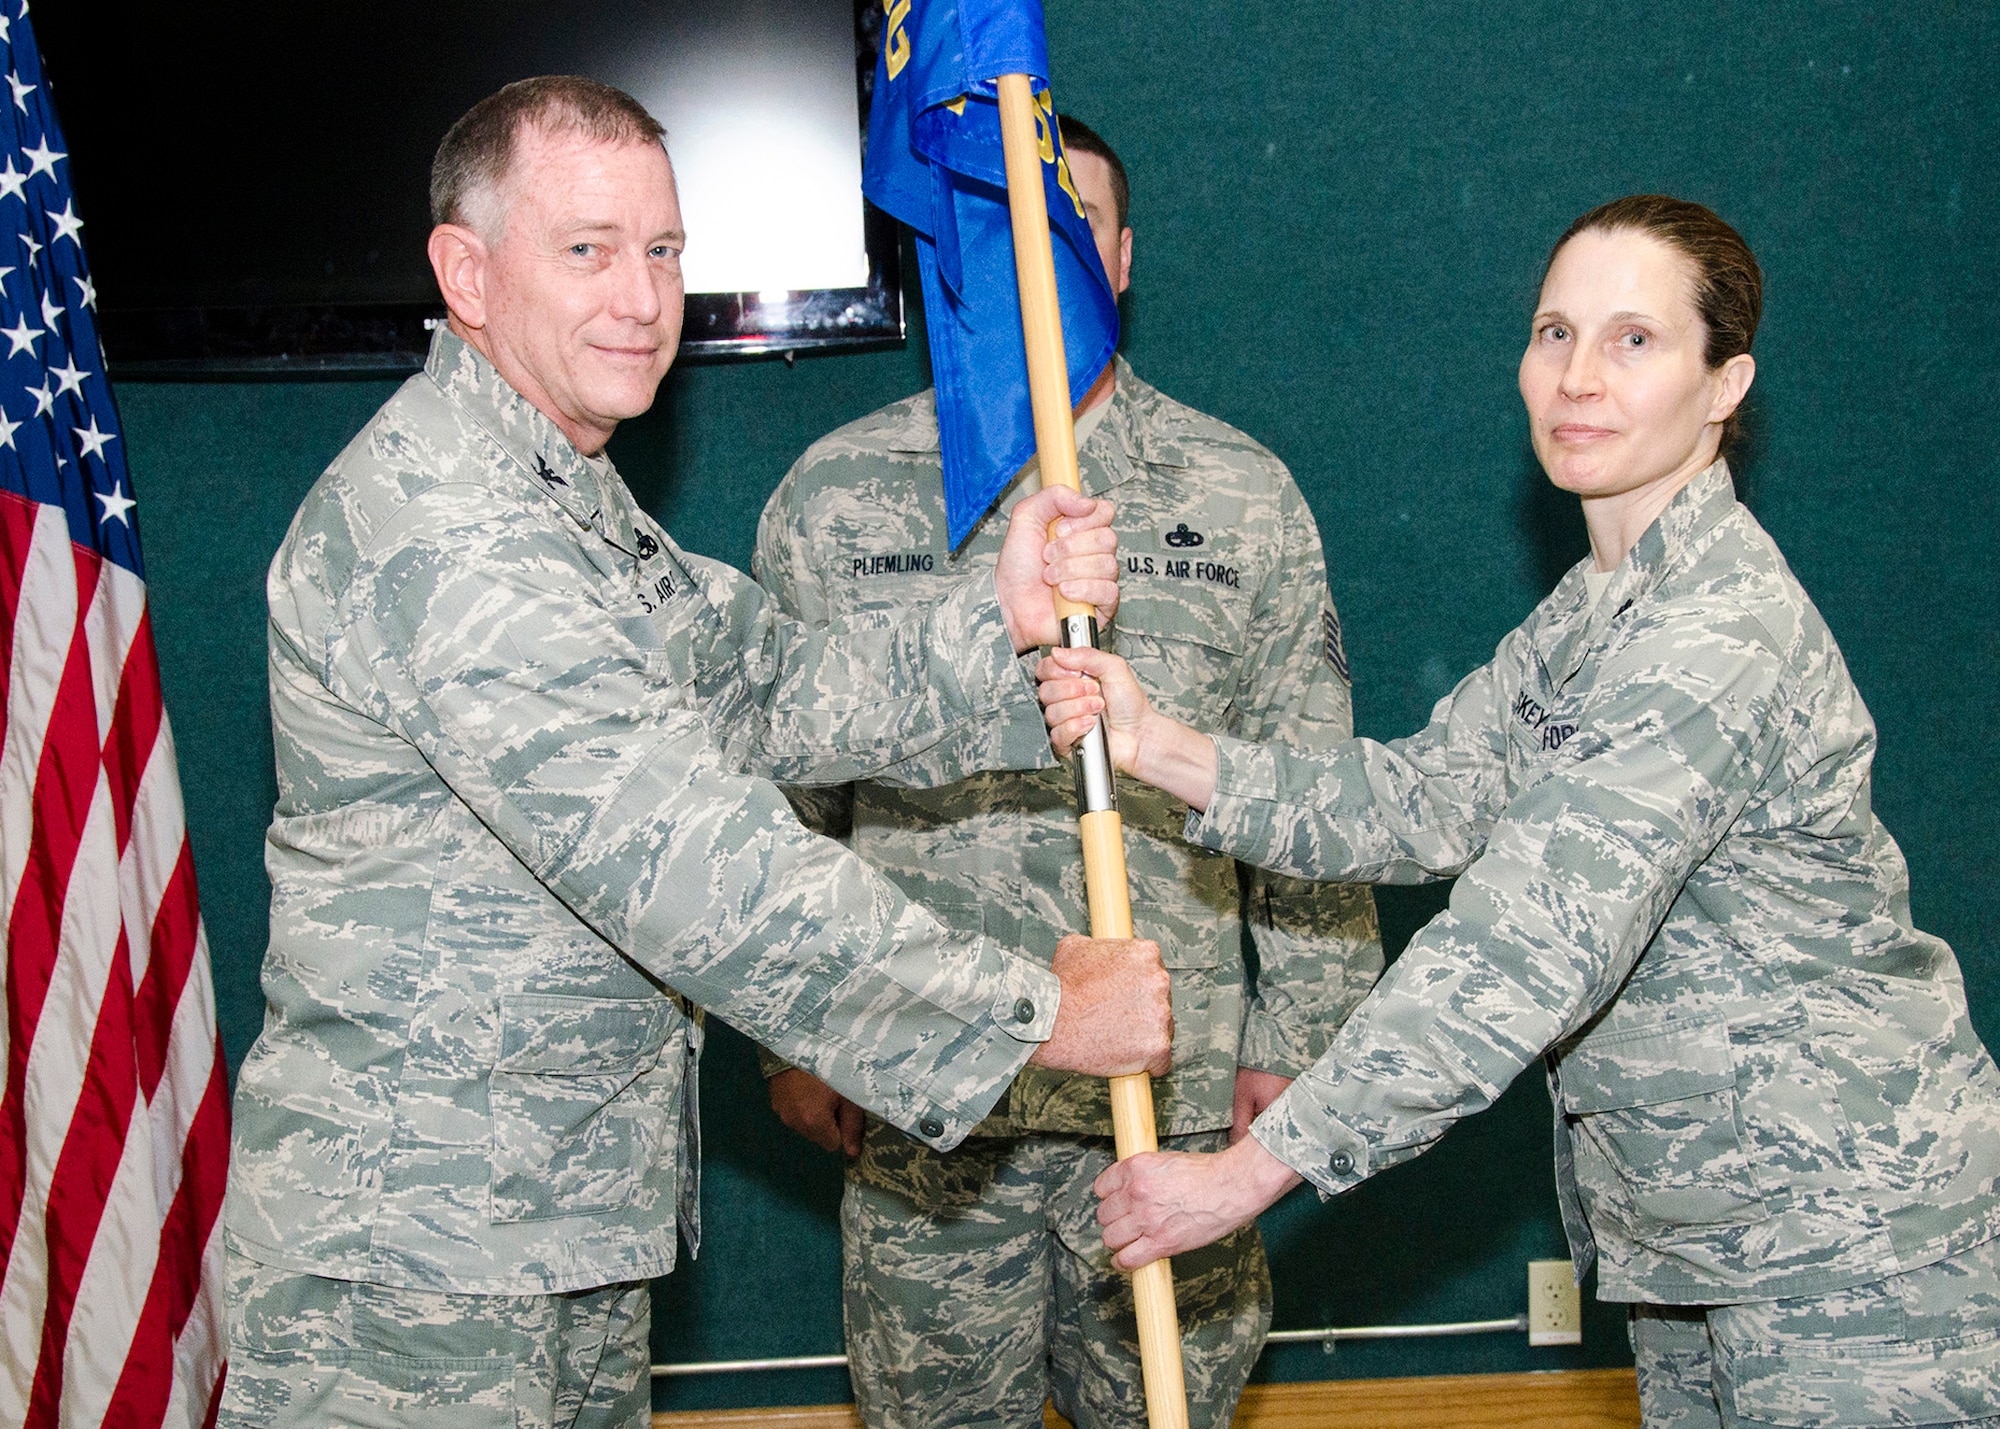 Lt Col. Catherine Sheskey, 131st Force Support Squadron commander, Missouri Air National Guard, accepts the 131st Bomb Wing guidon from Col. Mark Beck, 131st Bomb Wing Mission Support Group commander, during her assumption of command ceremony at Whiteman AFB, June 18, 2014. The guidon is a tradition that stems from ancient times and represents the unit and its commanding officer.  (U.S. Air National Guard photo by Airman Halley Burgess)